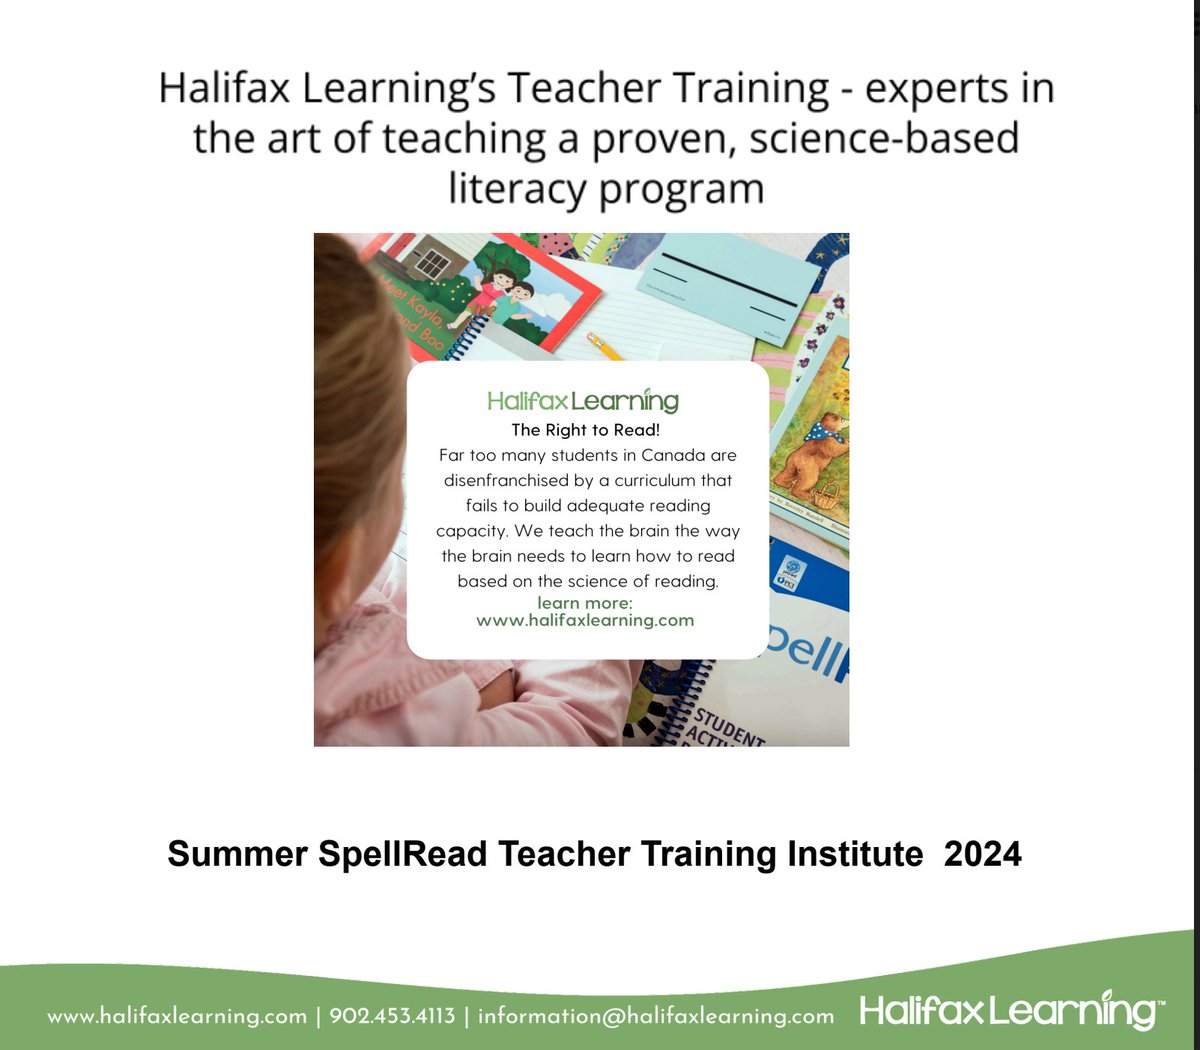 Thrilled the Nova Scotia Department of Education will be supporting Halifax Learning to train educators at our Teacher Training Institute this summer!!  

These educators will then deliver SpellRead to 400 students in summer camps all over our province!!  halifaxlearning.com